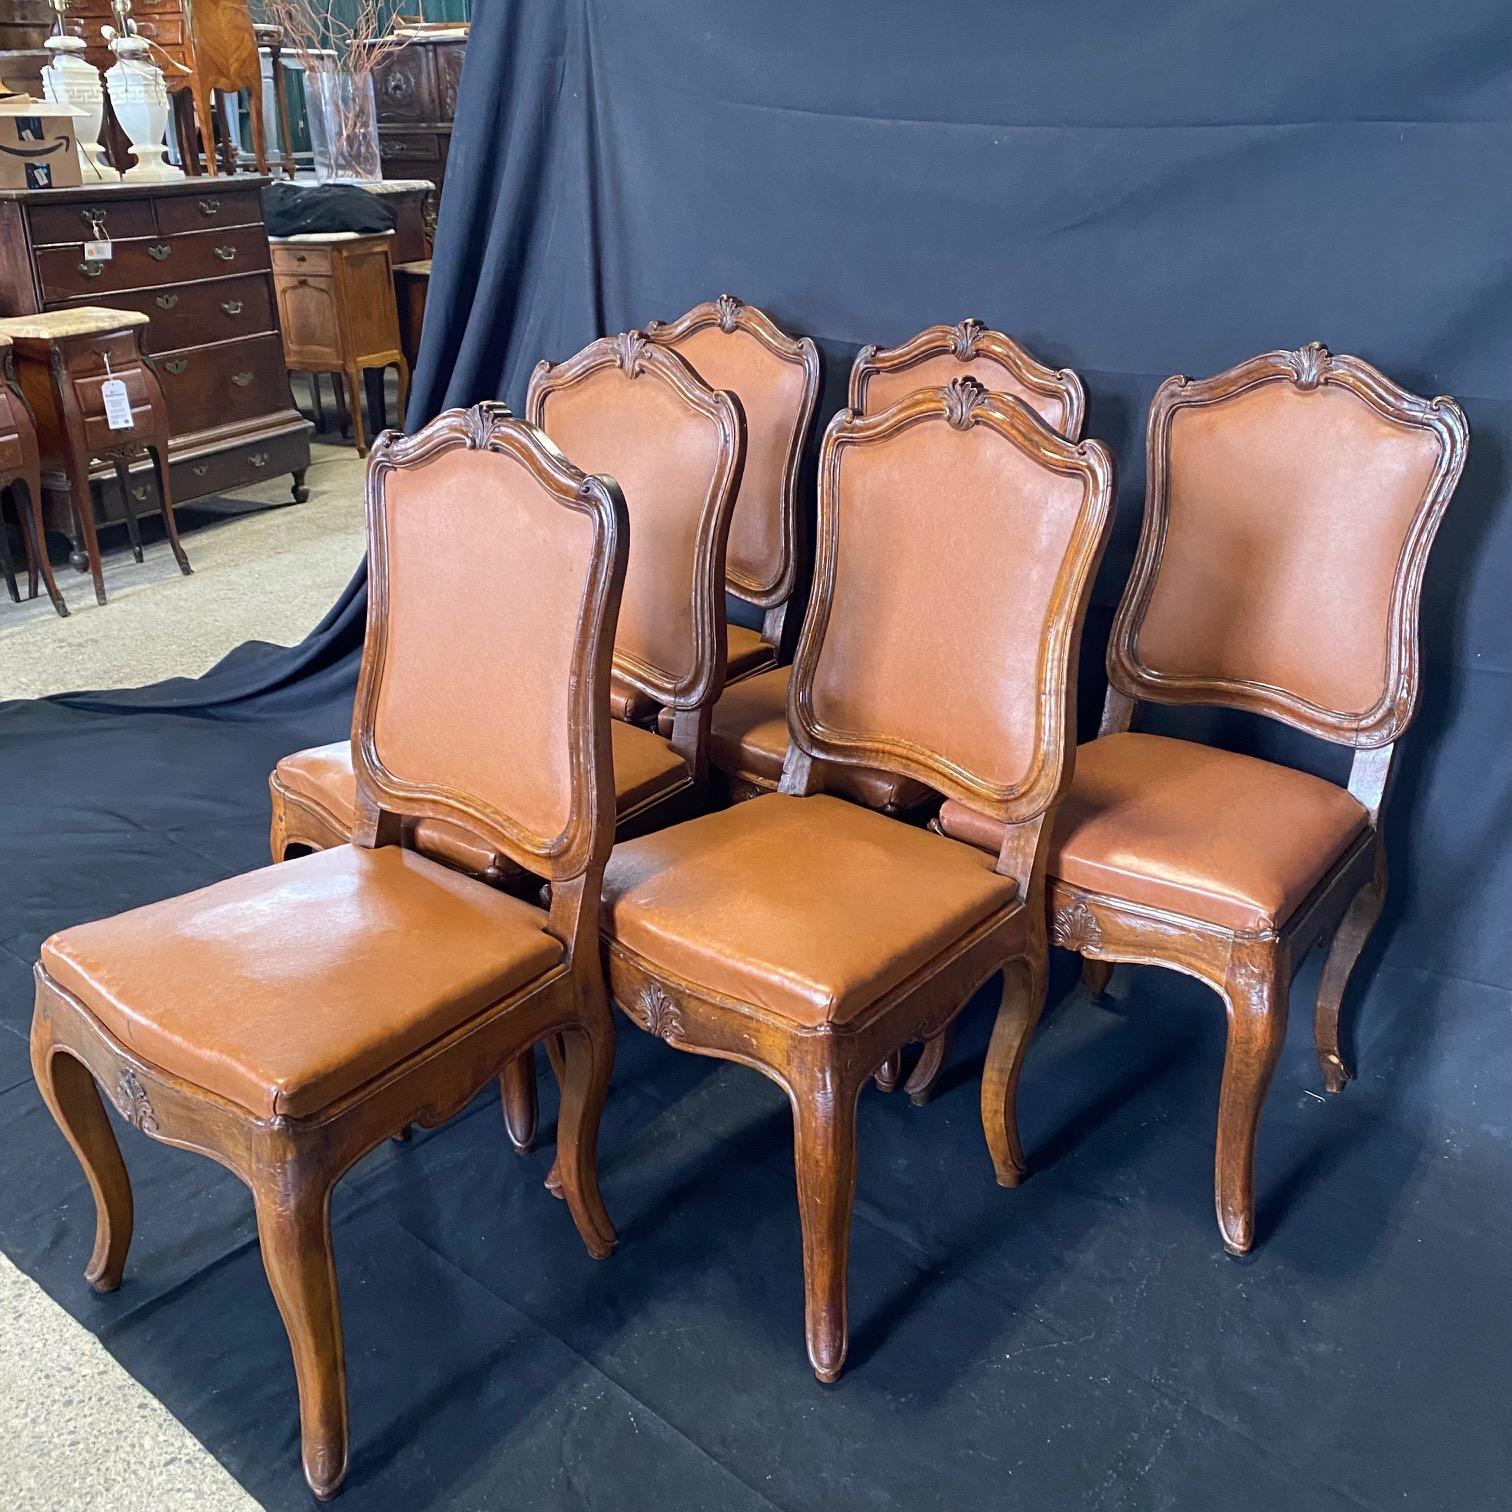 Absolutely stunning set of six early 19th century (or earlier) walnut carved Italian dining or side chairs. Aprons display lovely floret and chairs show peg construction and are solid and comfortable. Seats are aged worn faux leather that looks real